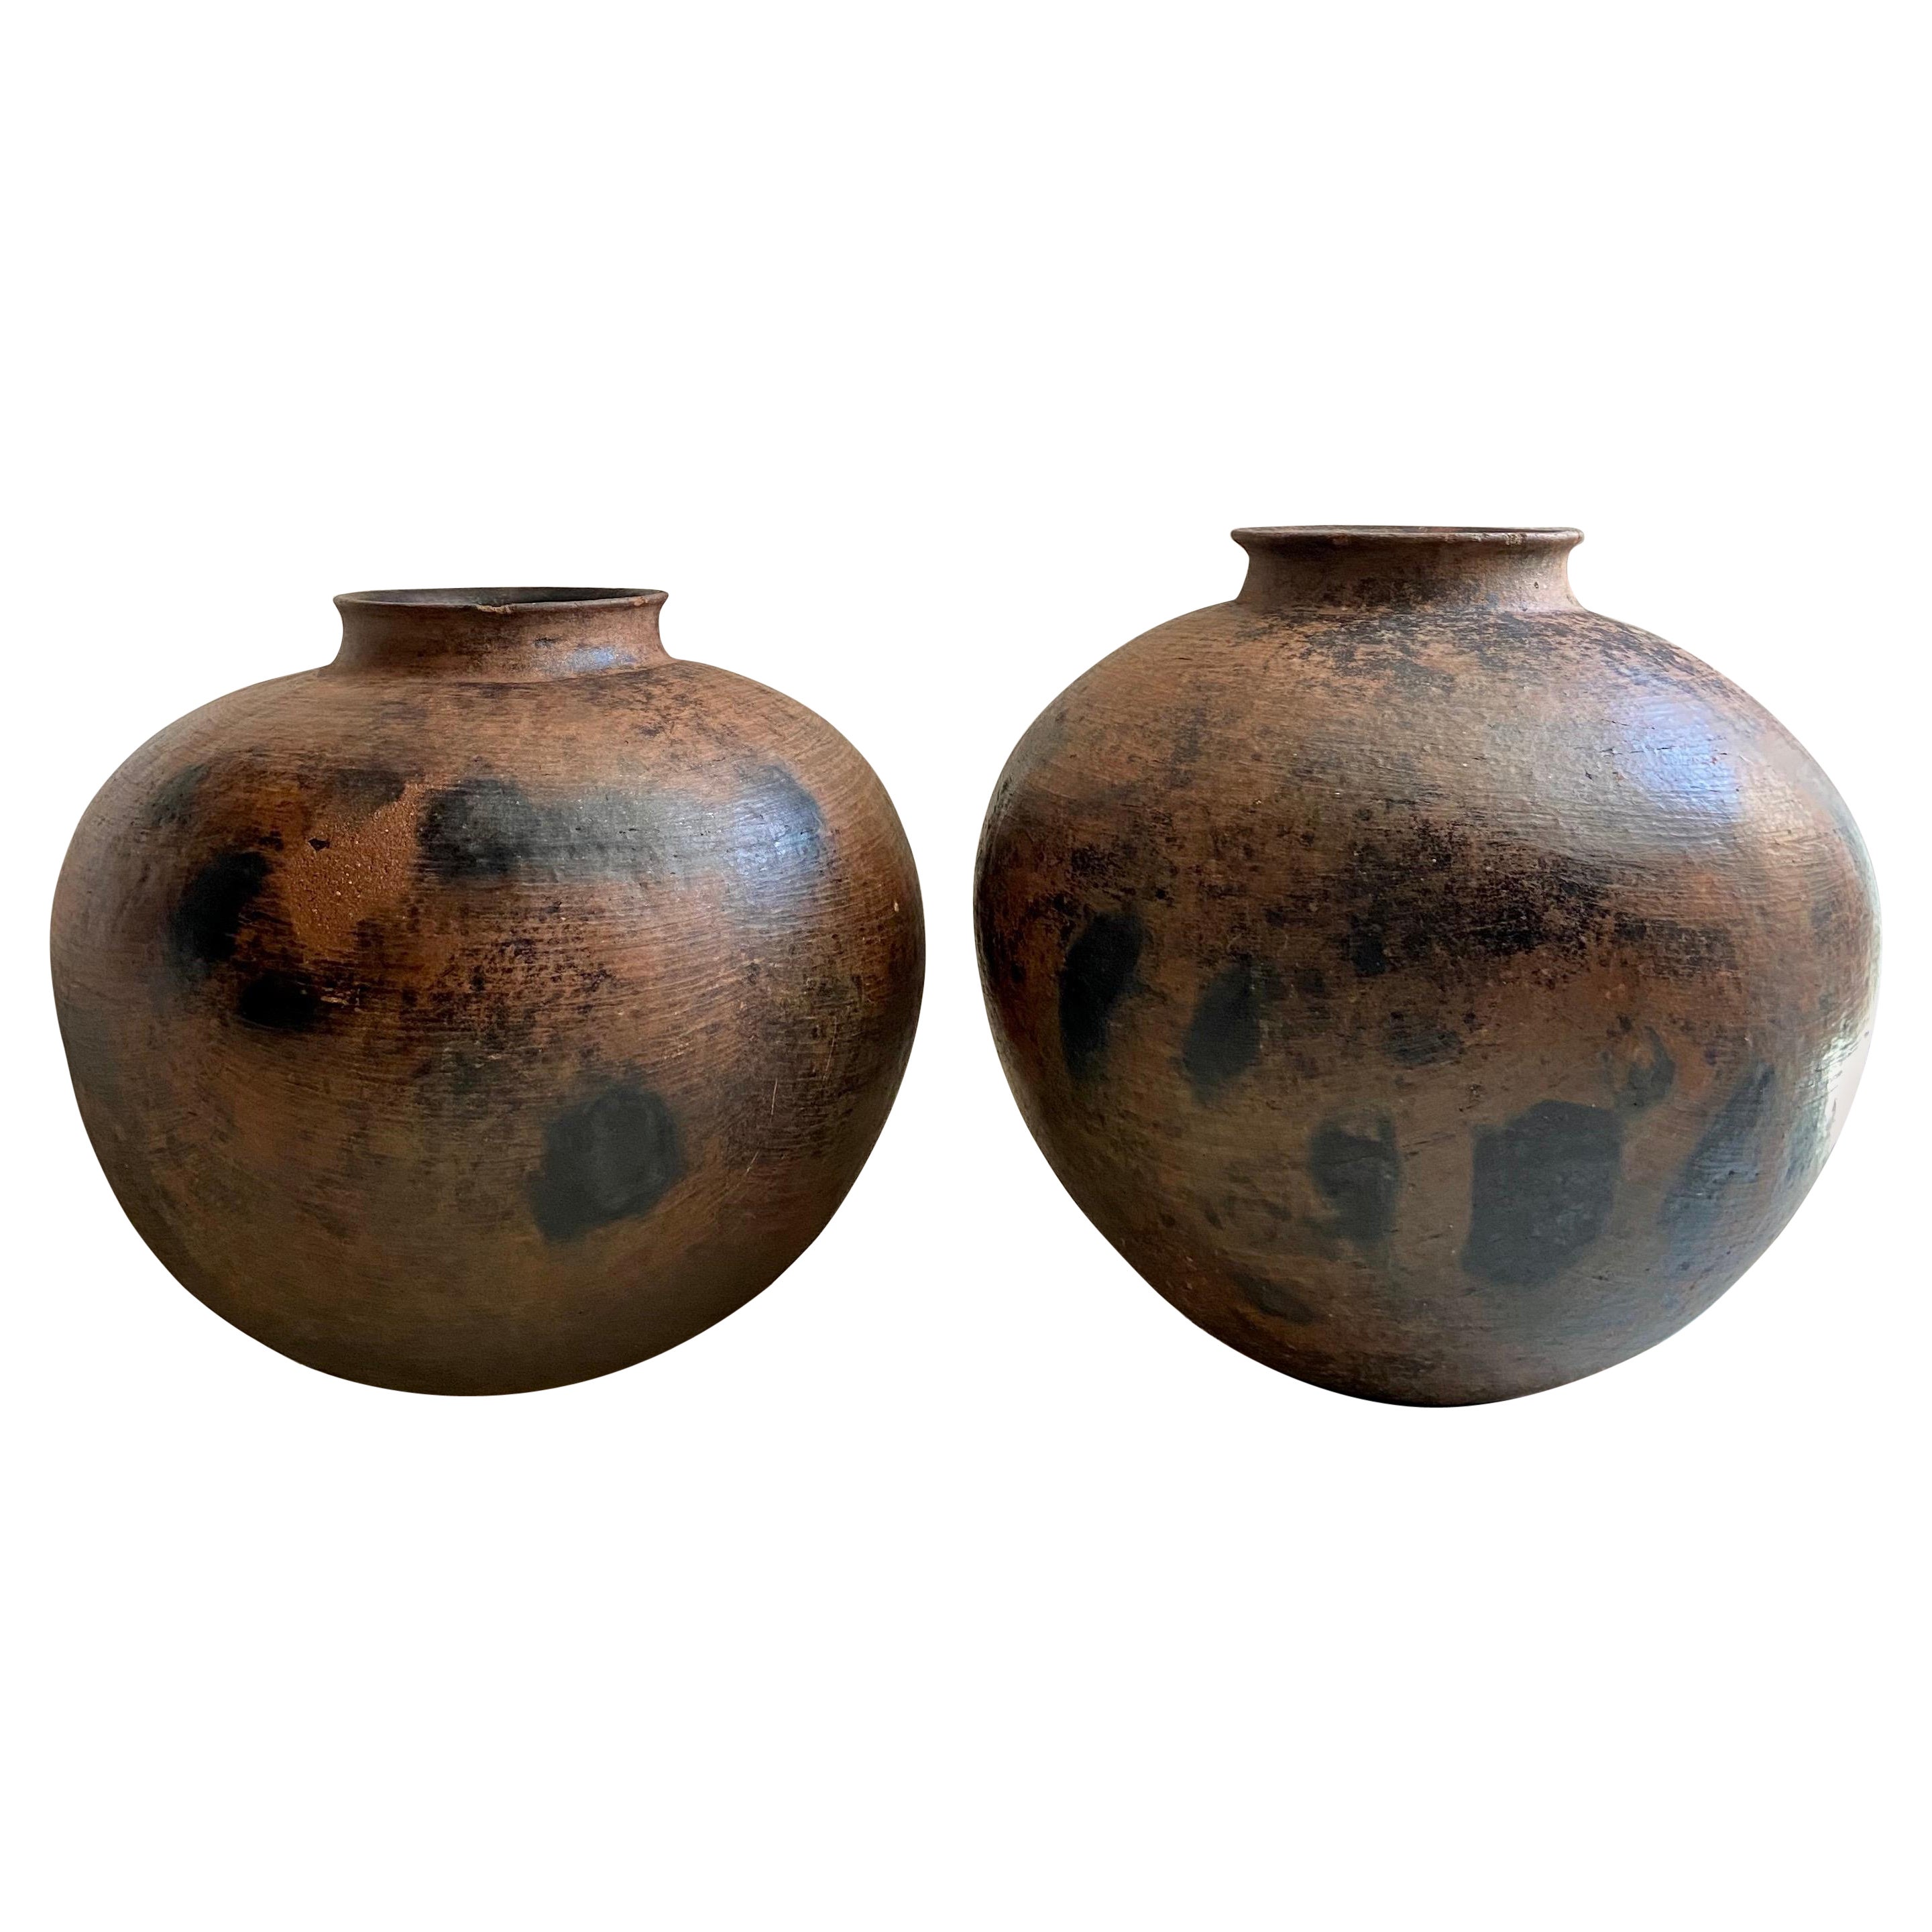 Set of Two Large Pots from Mexico